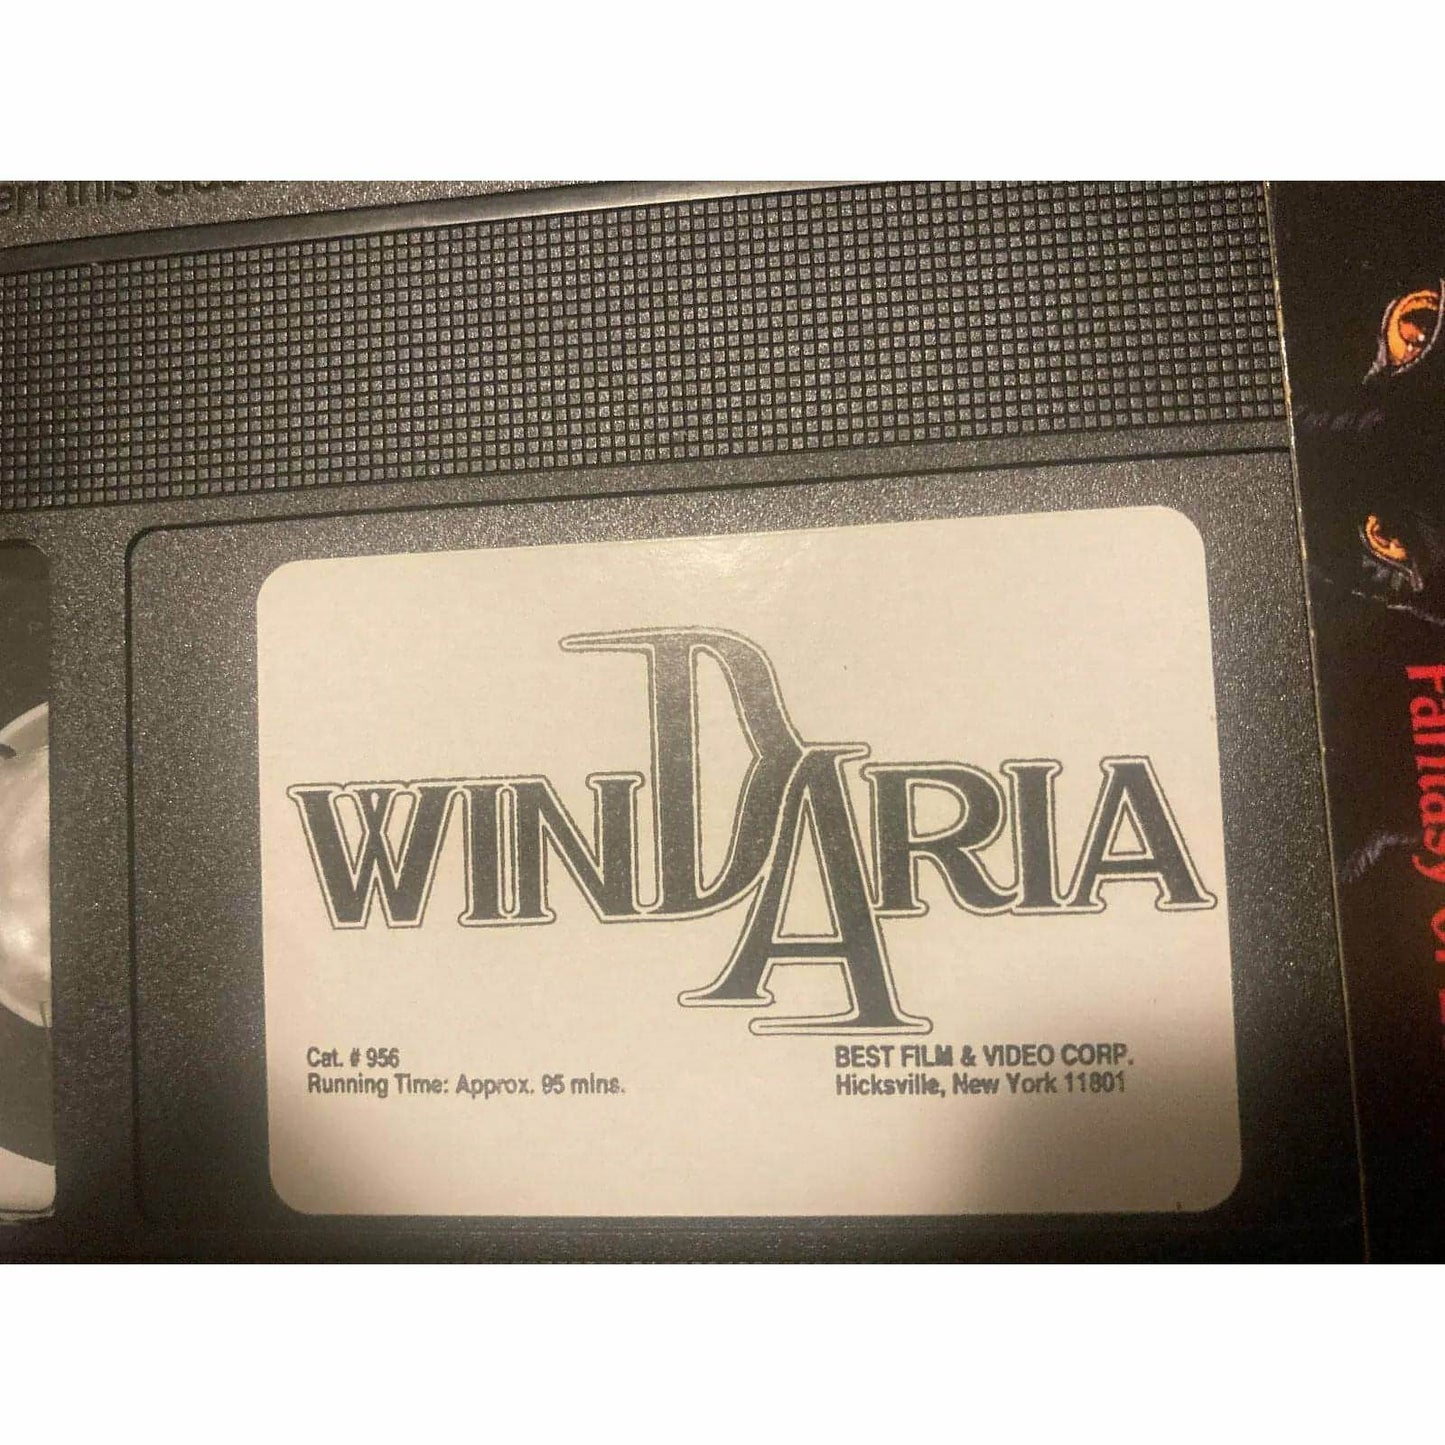 Windaria Once Upon a Time (Vintage VHS,1993) BooksCardsNBikes